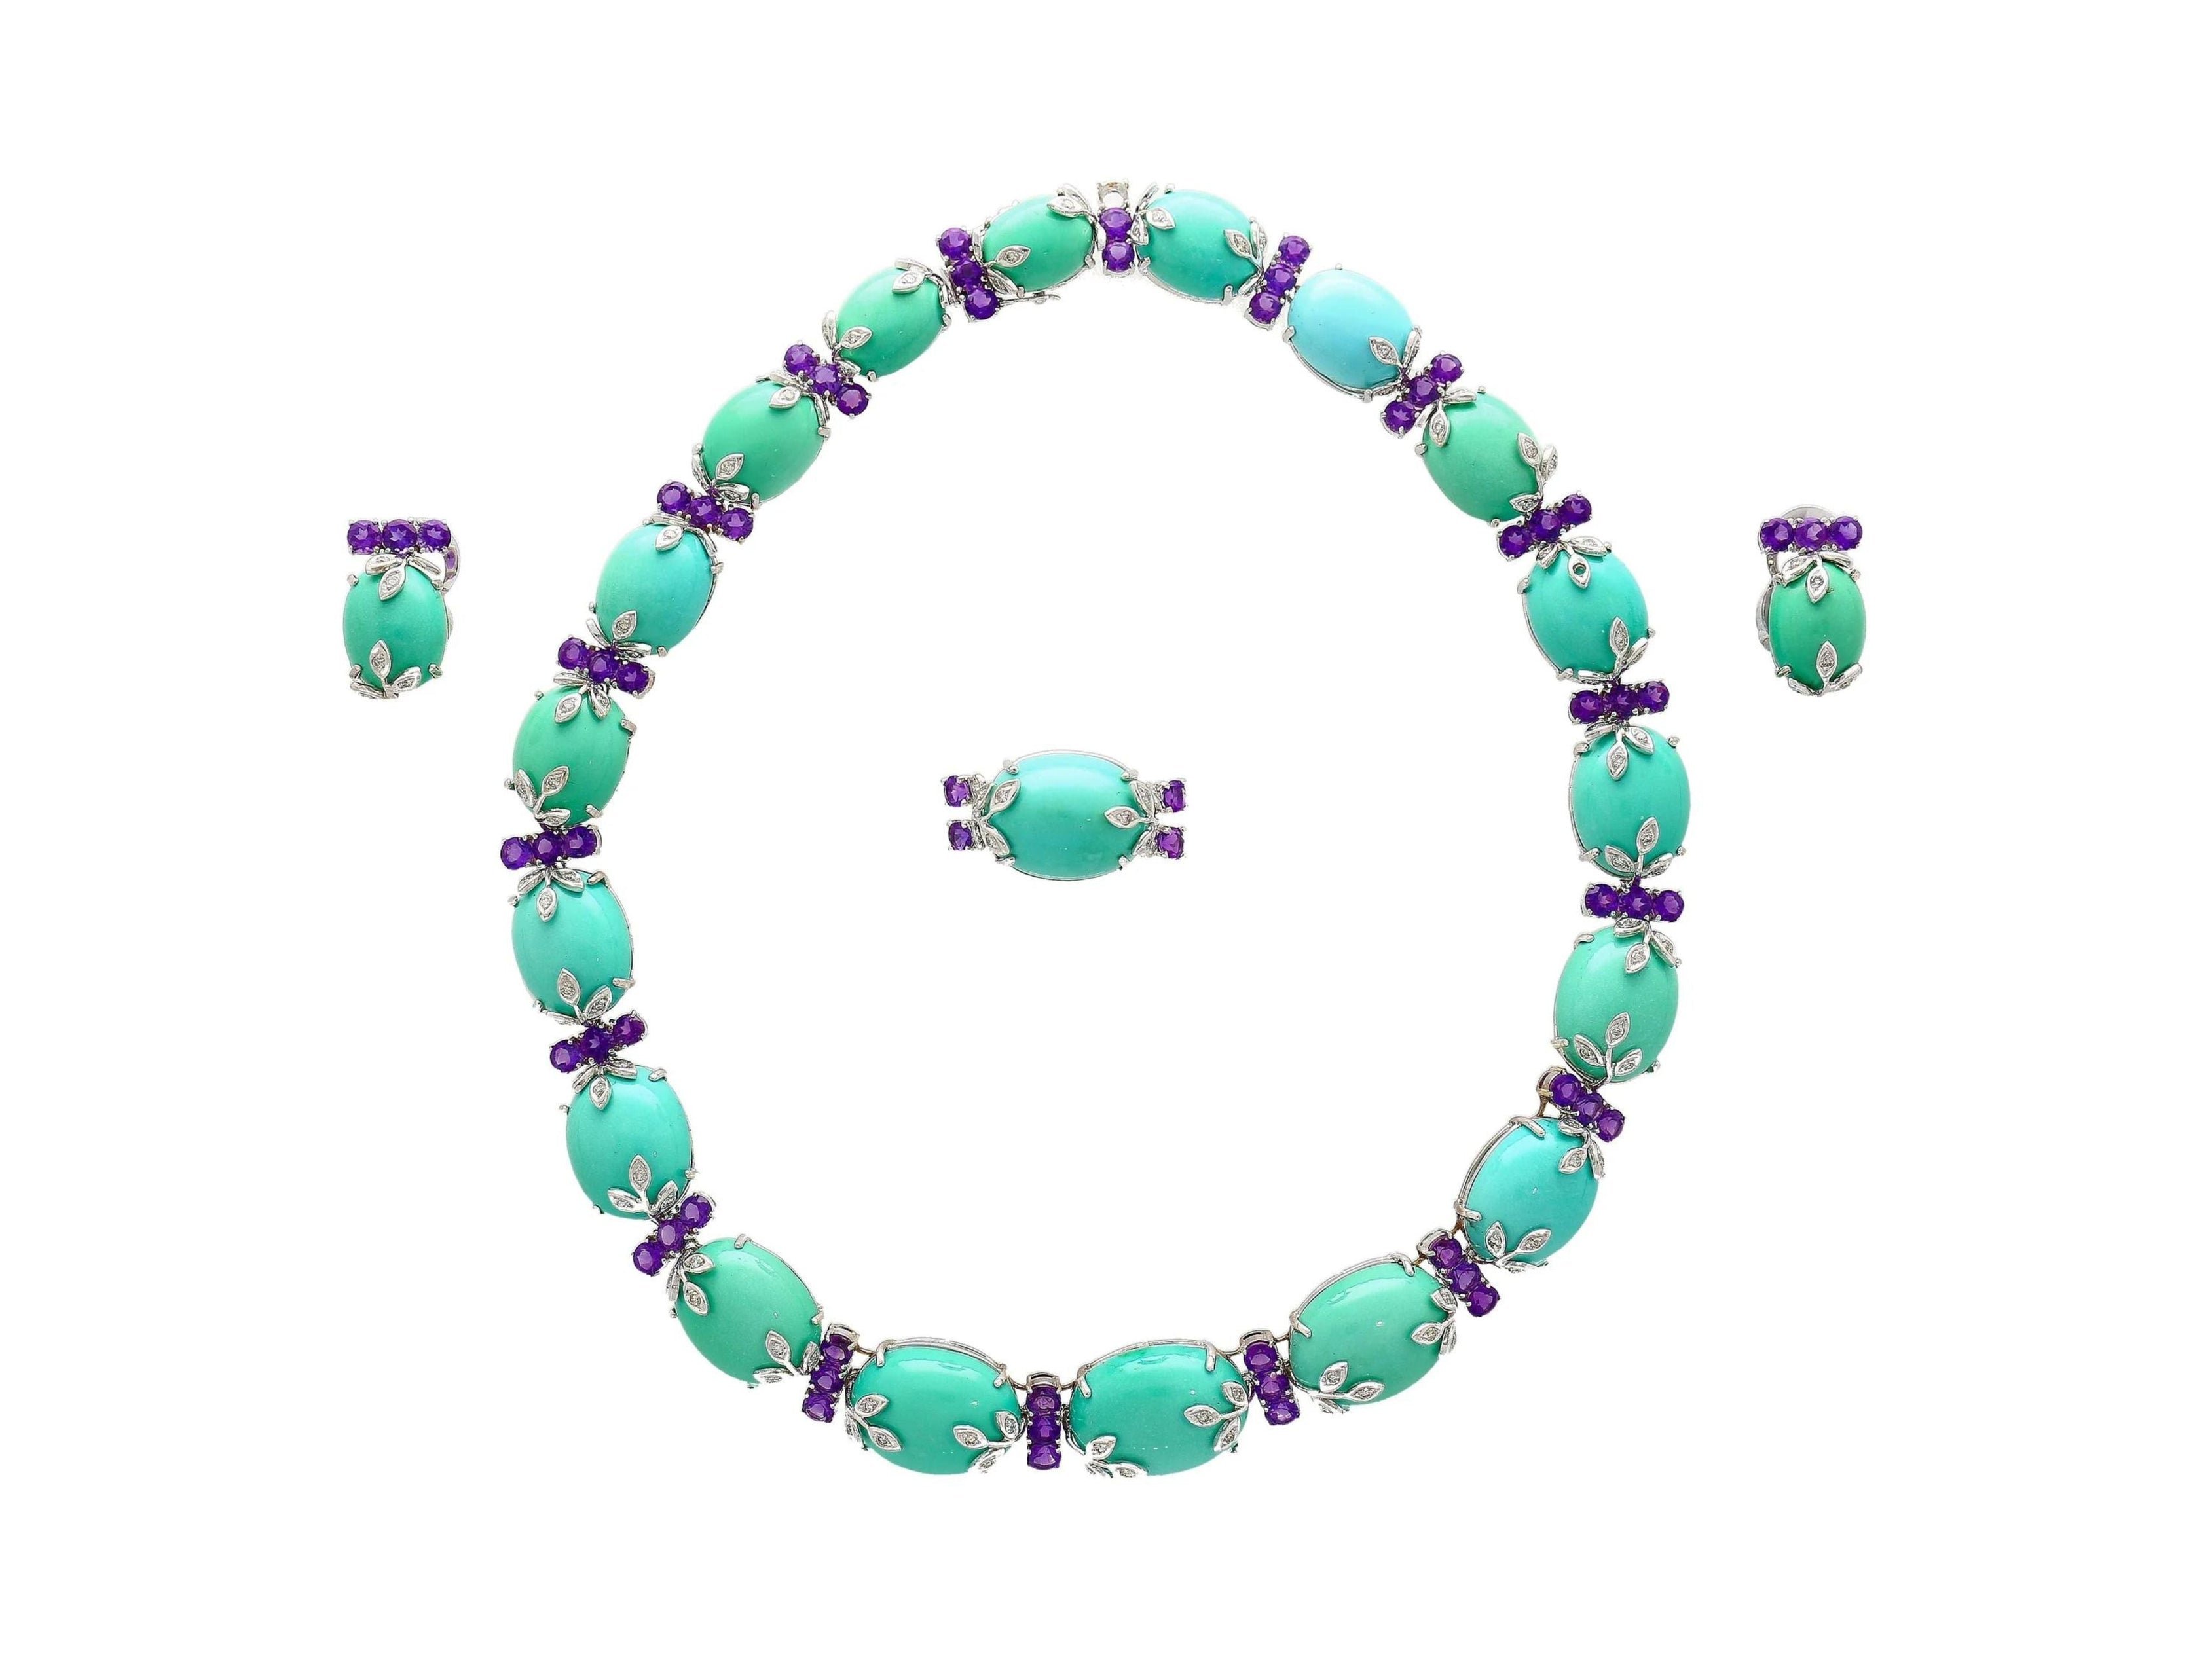 Vintage-Turquoise-Amethyst-and-Diamond-Ring-Earring-and-Necklace-Jewelry-Set-Jewelery-Sets.jpg